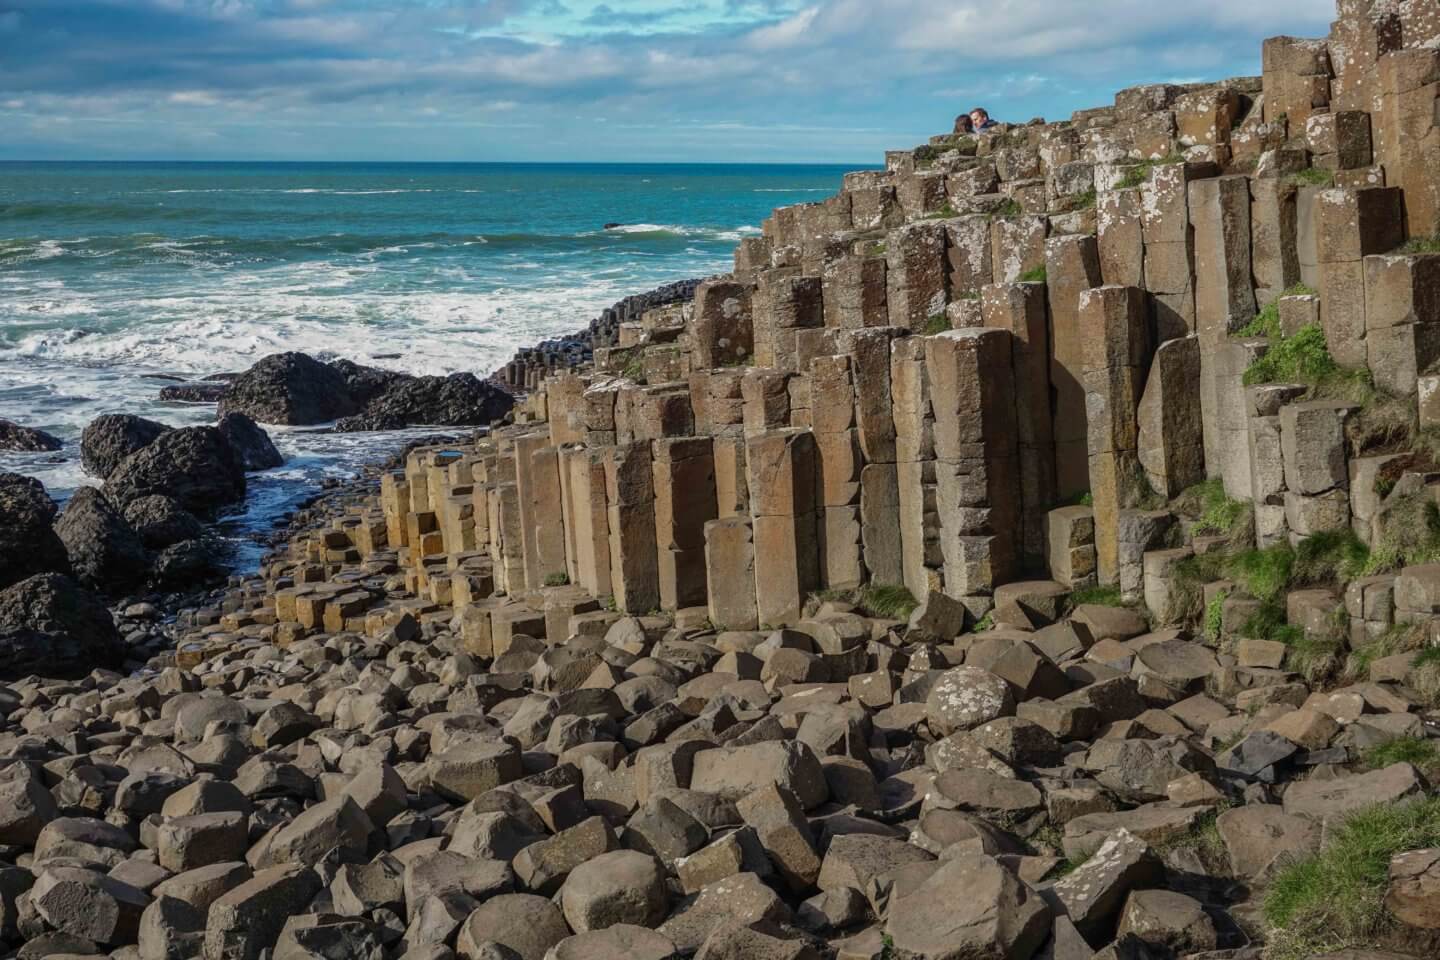 The Giant's Causeway with the ocean in the background - places to visit in Ireland